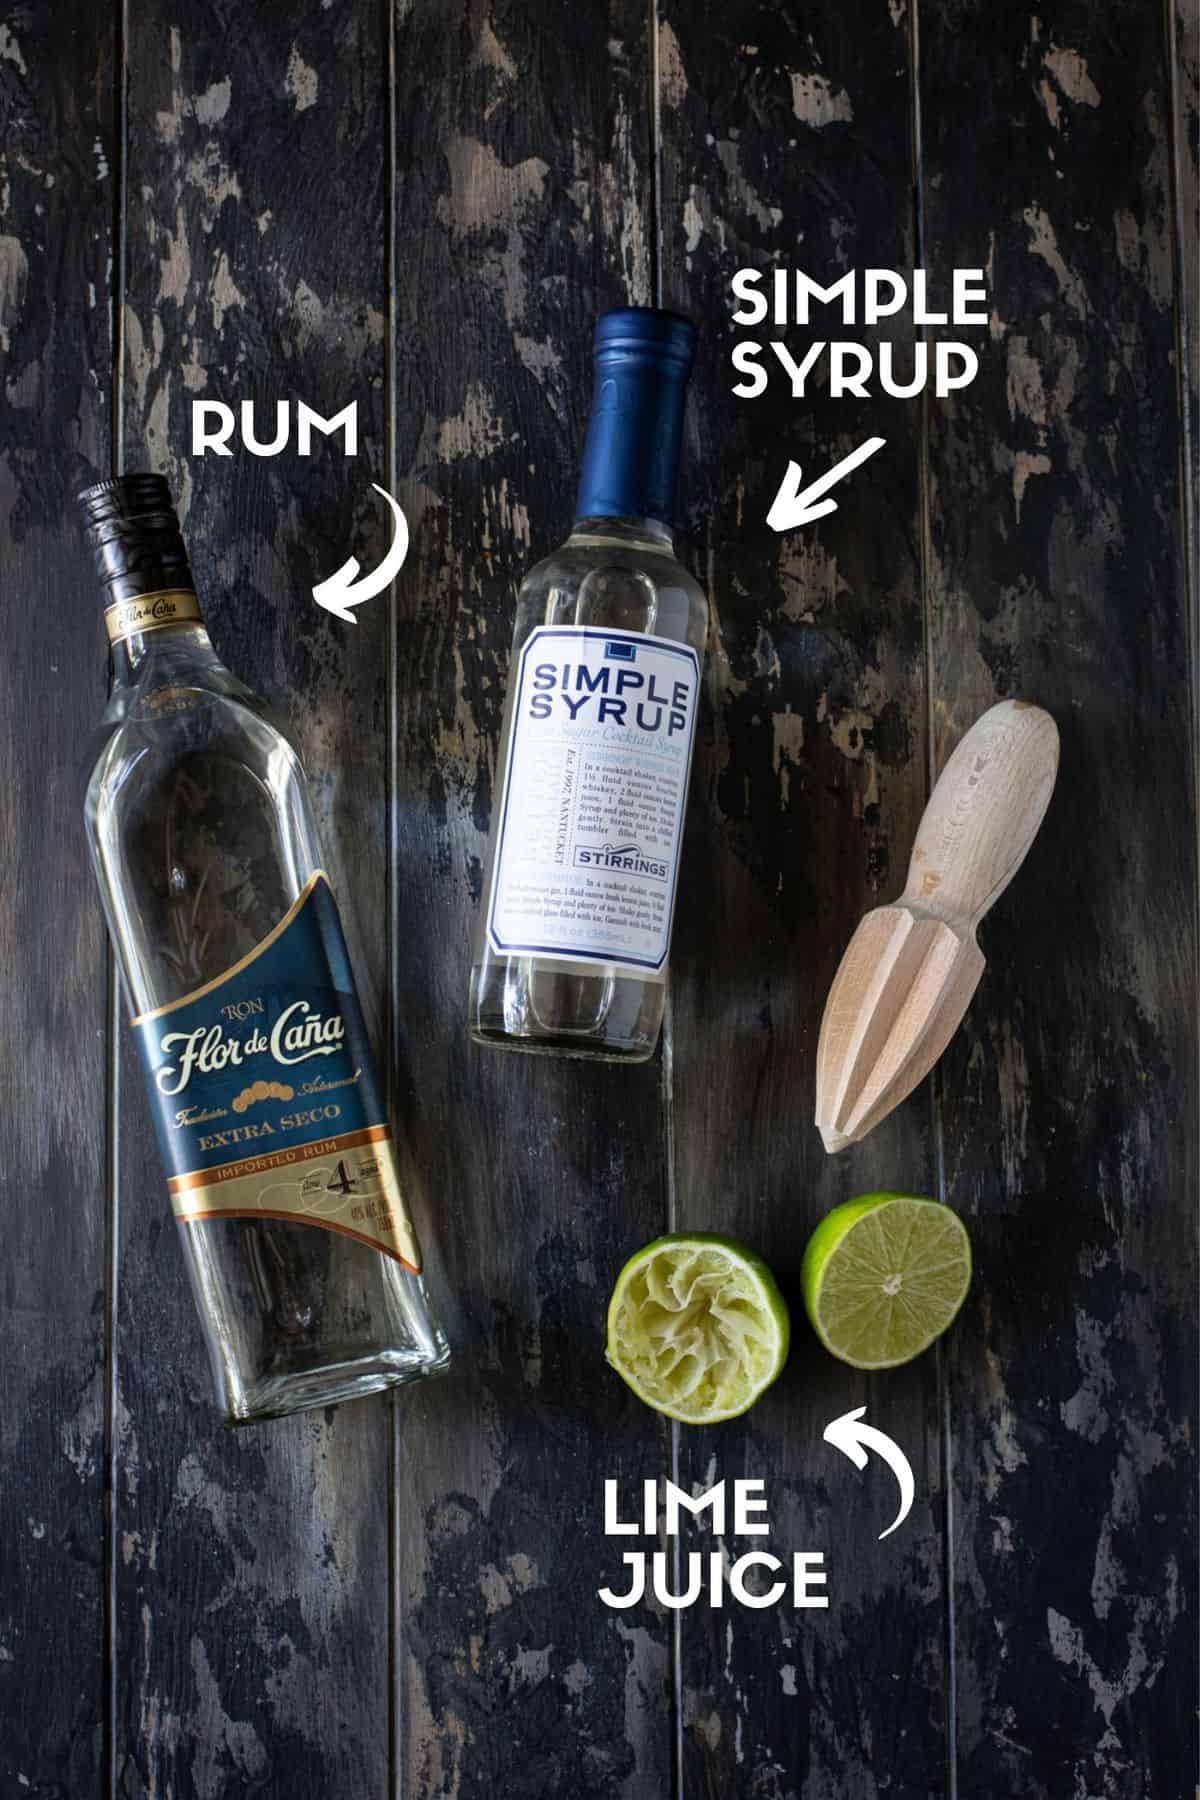 Daiquiri ingredients including rum, simple syrup and lime juice.